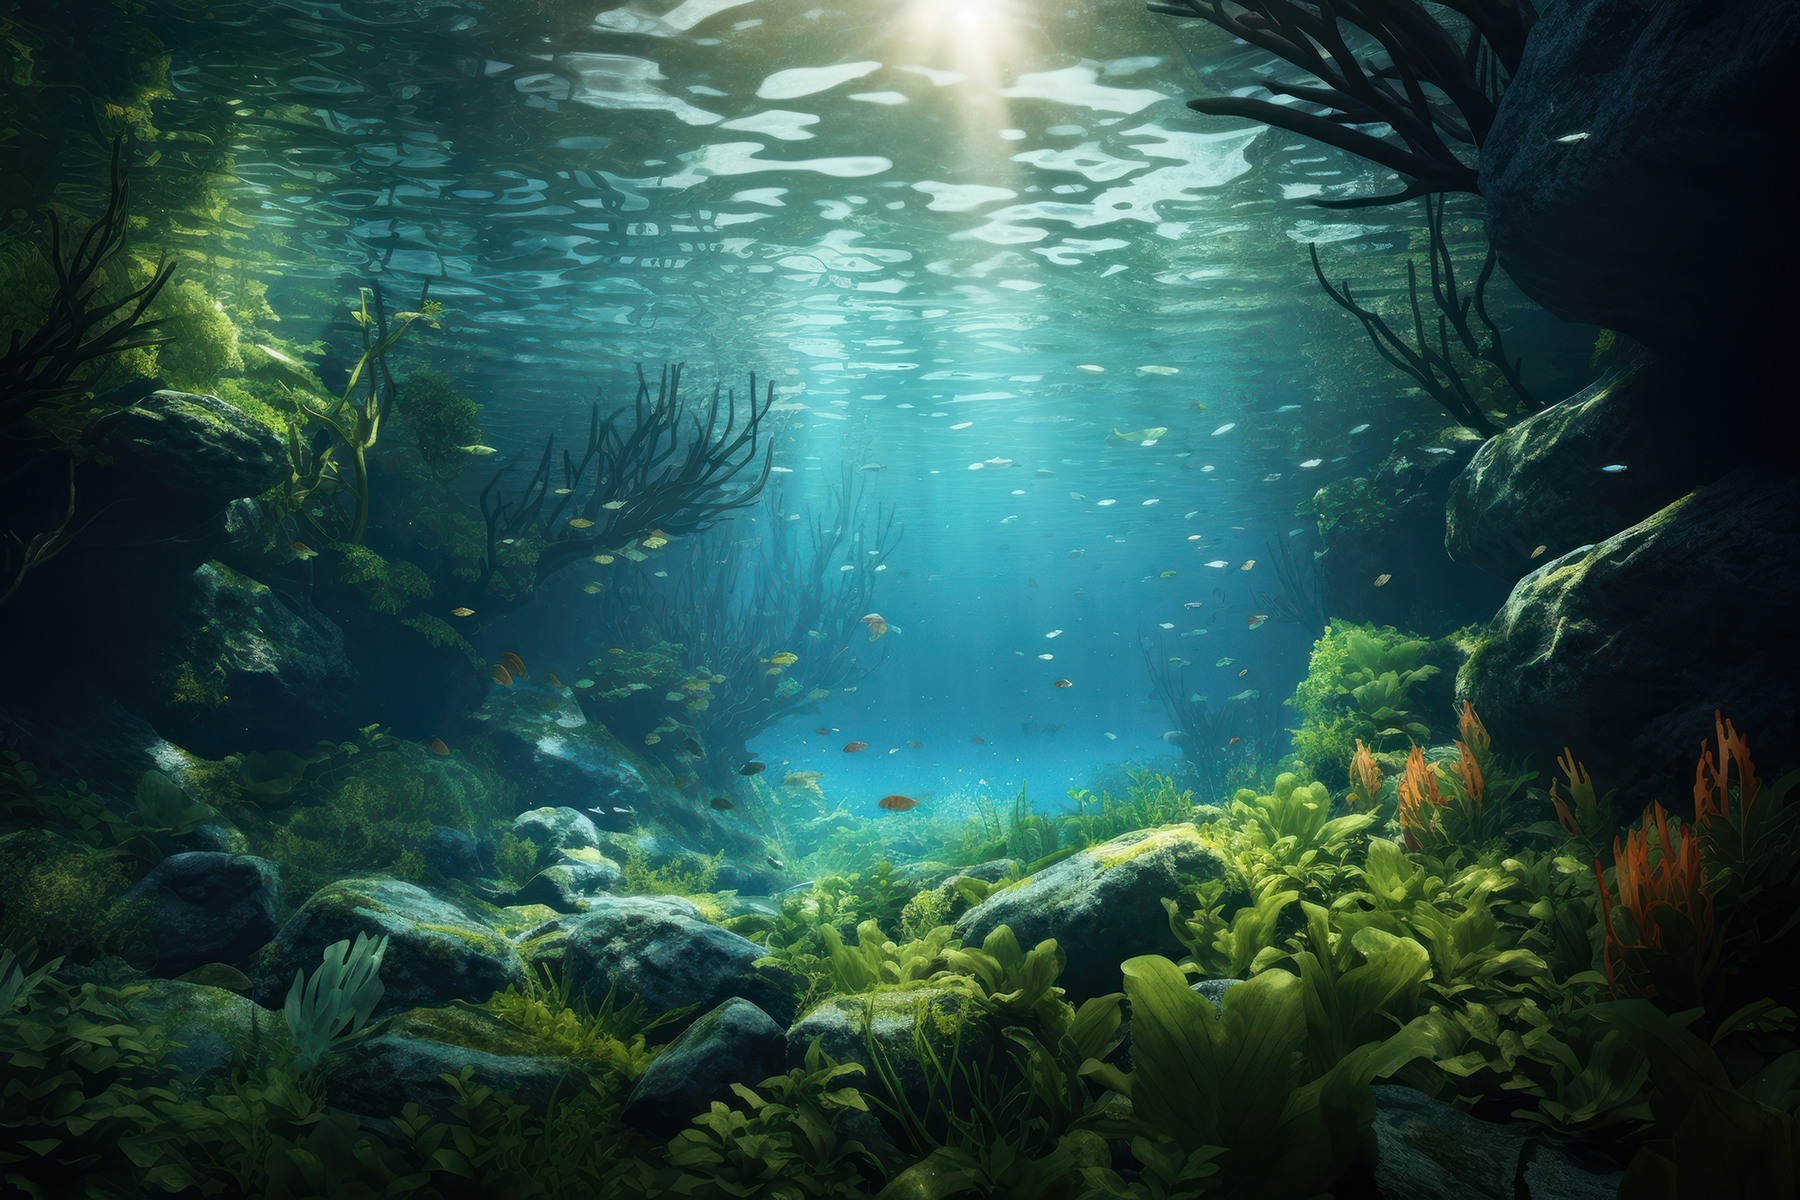 An image of marine life as seen from under the water. Fish, coral and plants all are represented in this complex ecosystem.